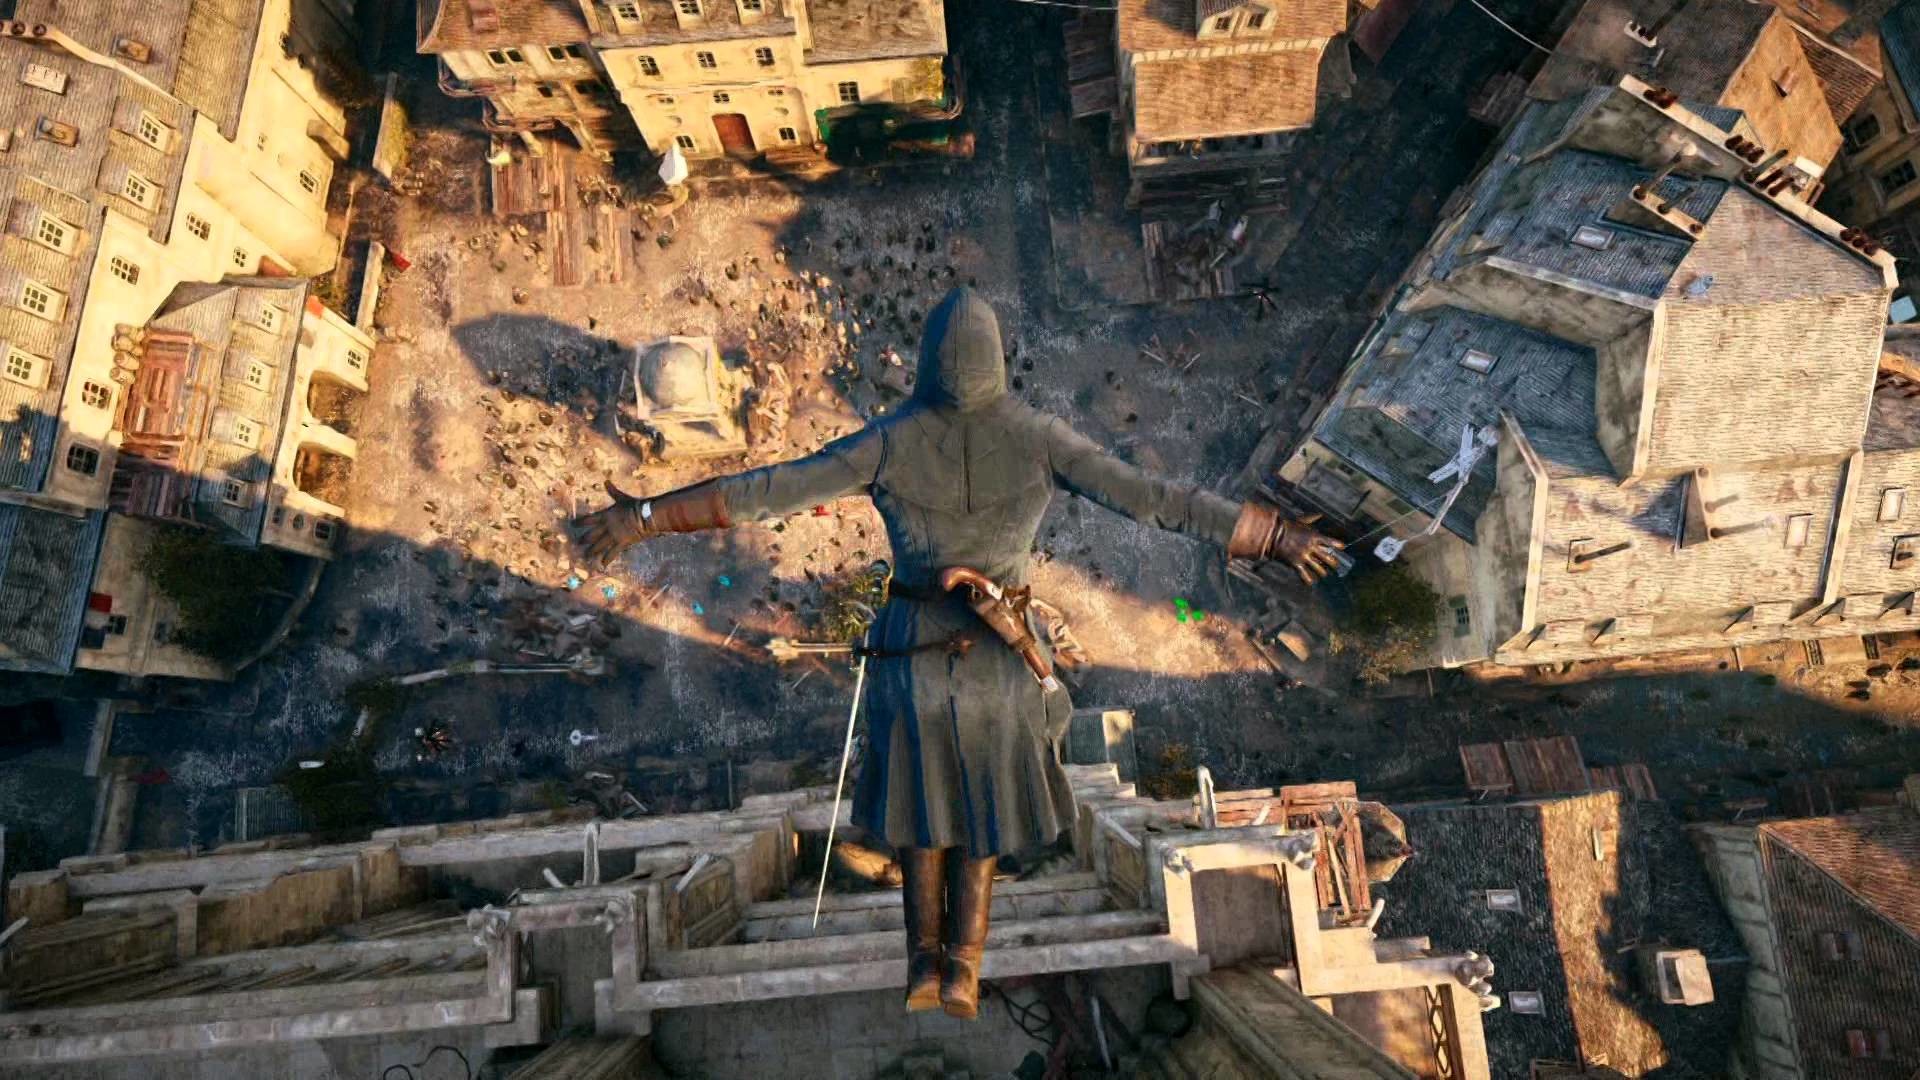 1920x1080 Assassin's Creed Unity Dead Kings DLC Cinematic Trailer [UK] by .